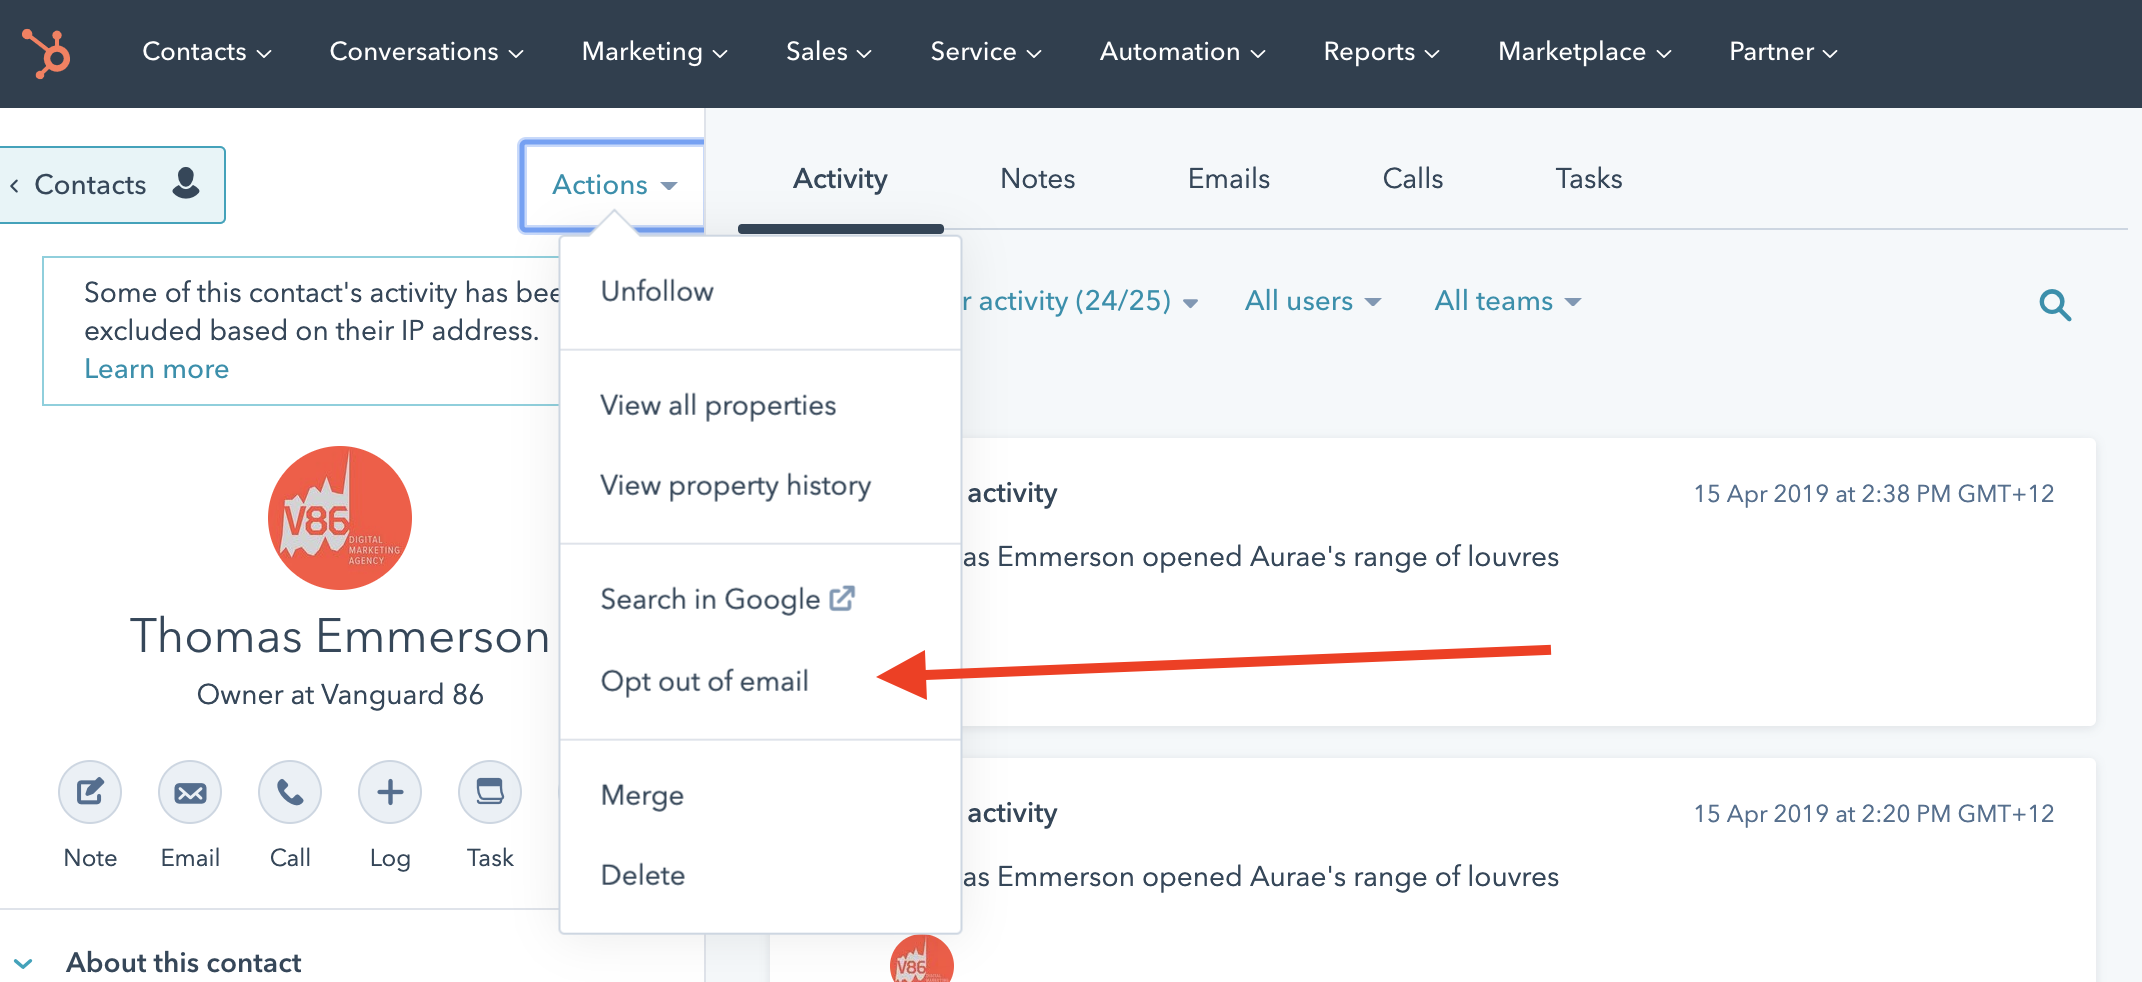 This image shows how easy it is to opt someone out of an email in HubSpot